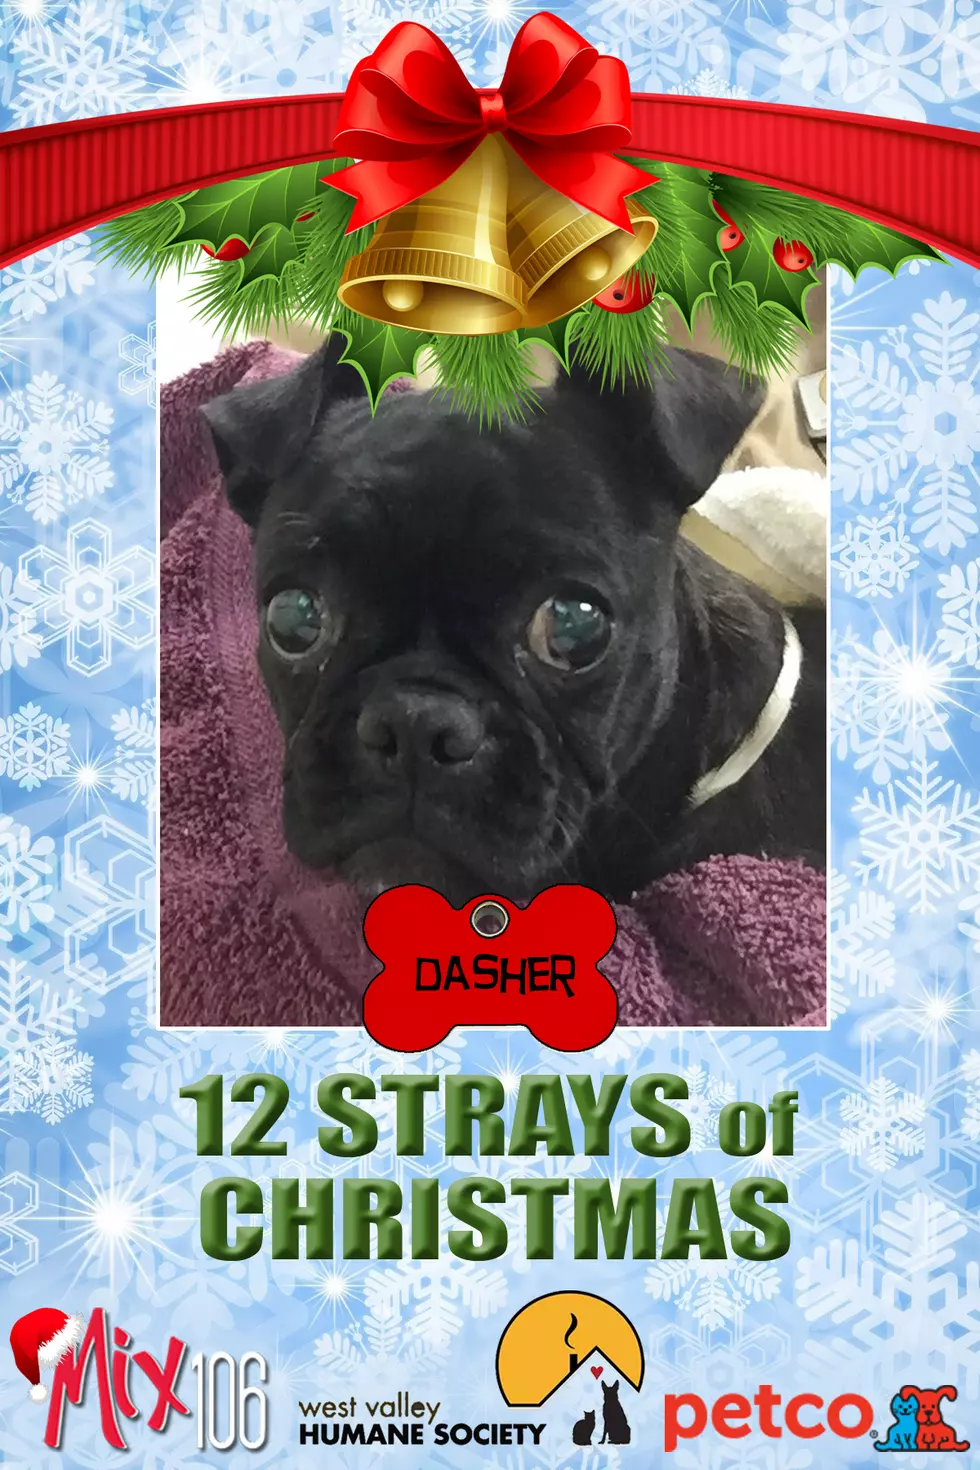 #10 of The 12 Strays of Christmas – Dasher